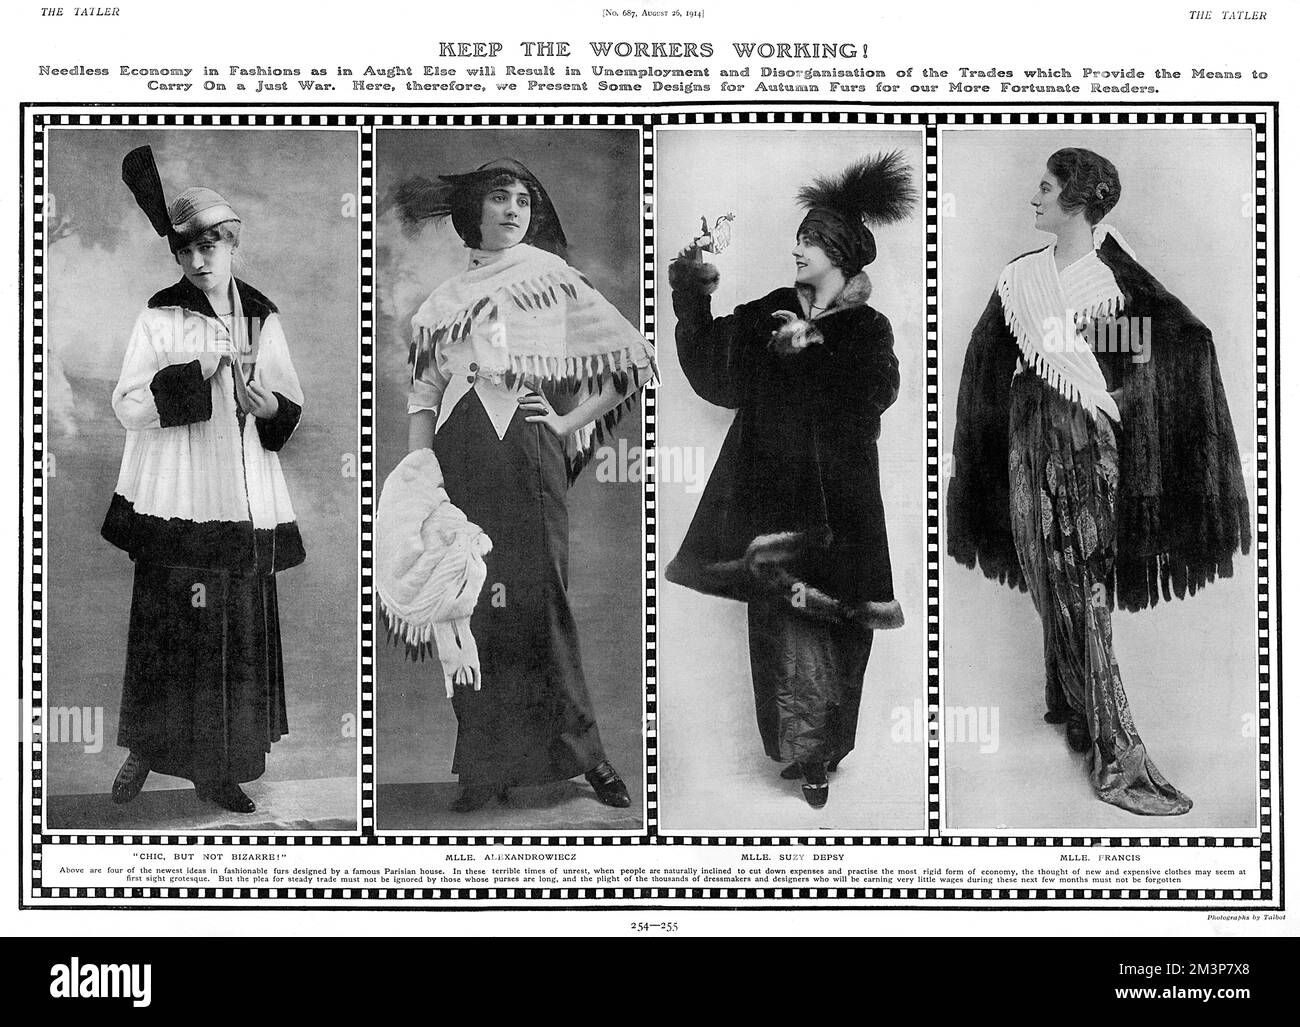 A spread from The Tatler featuring four designs for fur coats from a Parisian design house and ladies to continue to buy luxury fashion in wartime.  It states that even though the 'thought of new and expensive clothes may seem at first sight grotesque...But the plea for steady trade must not be ignored by those whose purses are long, and plight of the thousands of dressmakers and designers who will be earning very little wages during these next few months must not be forgotten.'  1914 Stock Photo